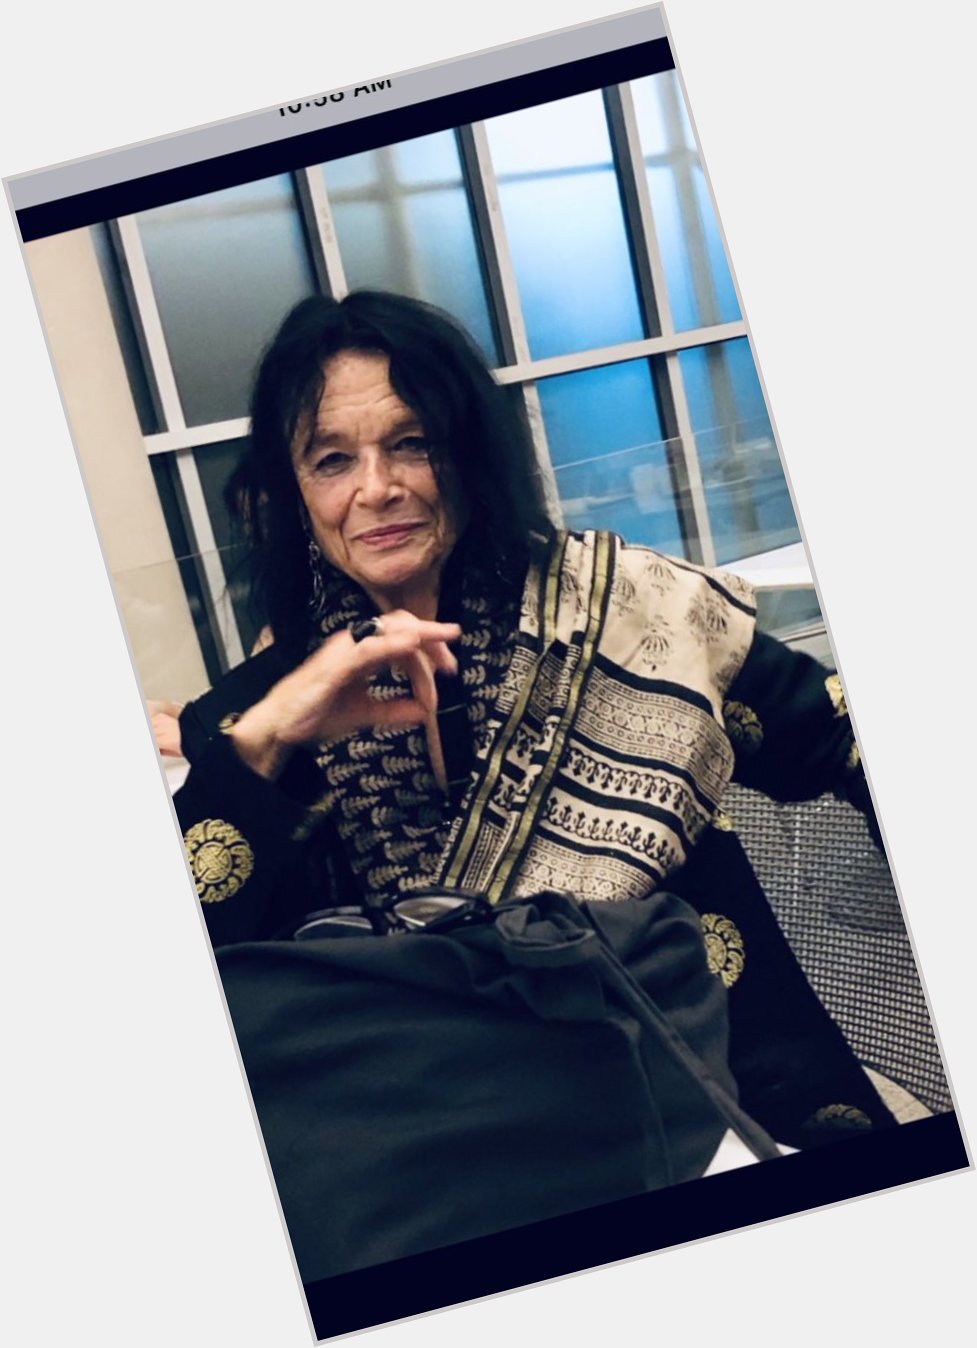 Happy Birthday  Anne Waldman 
I had the good luck to run into her at the Met in 2019 and got this photo 